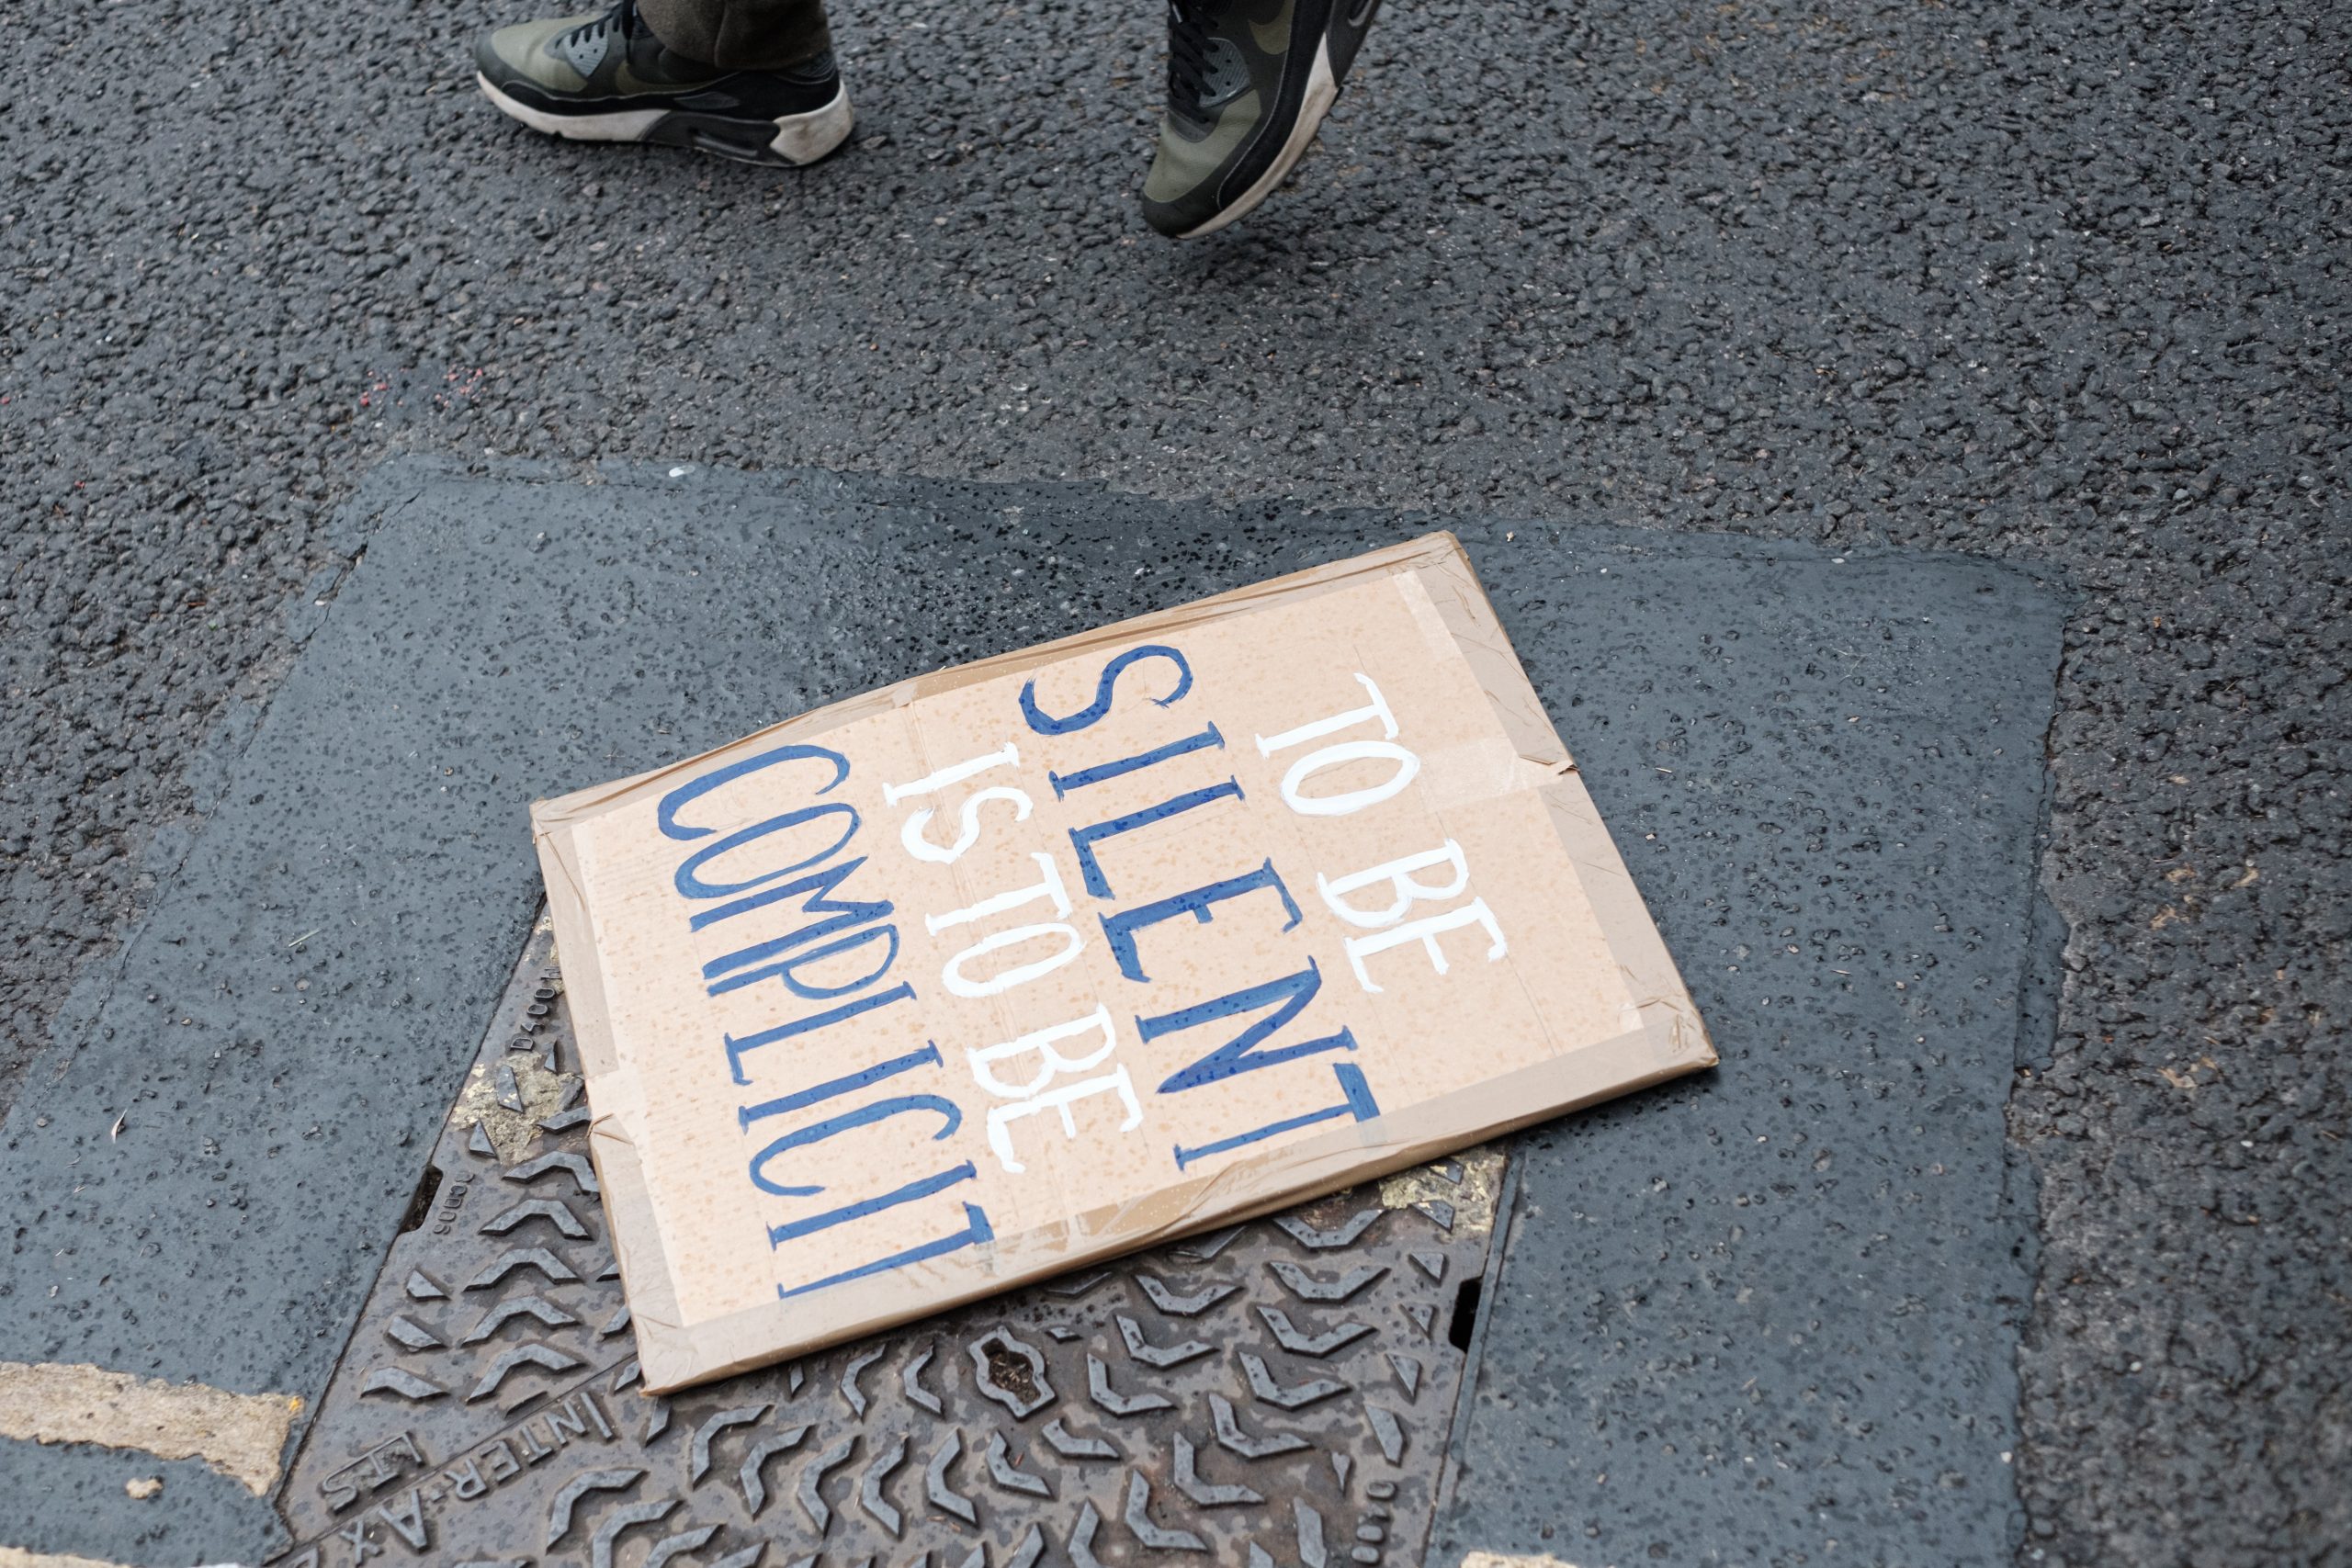 A sign written on cardboard lies on the floor. It reads "To be silent is to be complicit" in alternating white and blue text